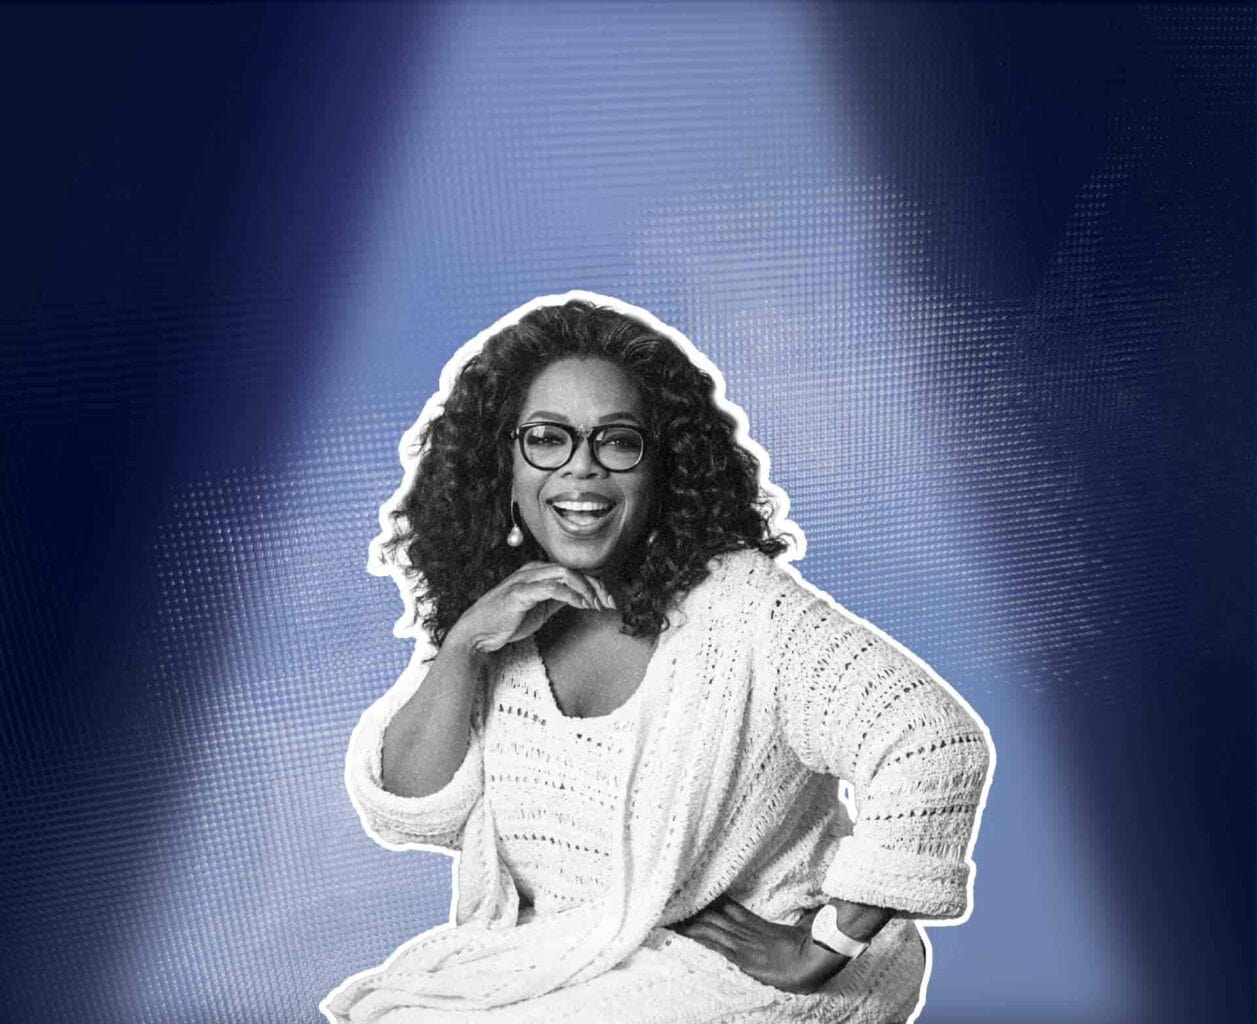 The family office managing Oprah Winfrey's investments Simple